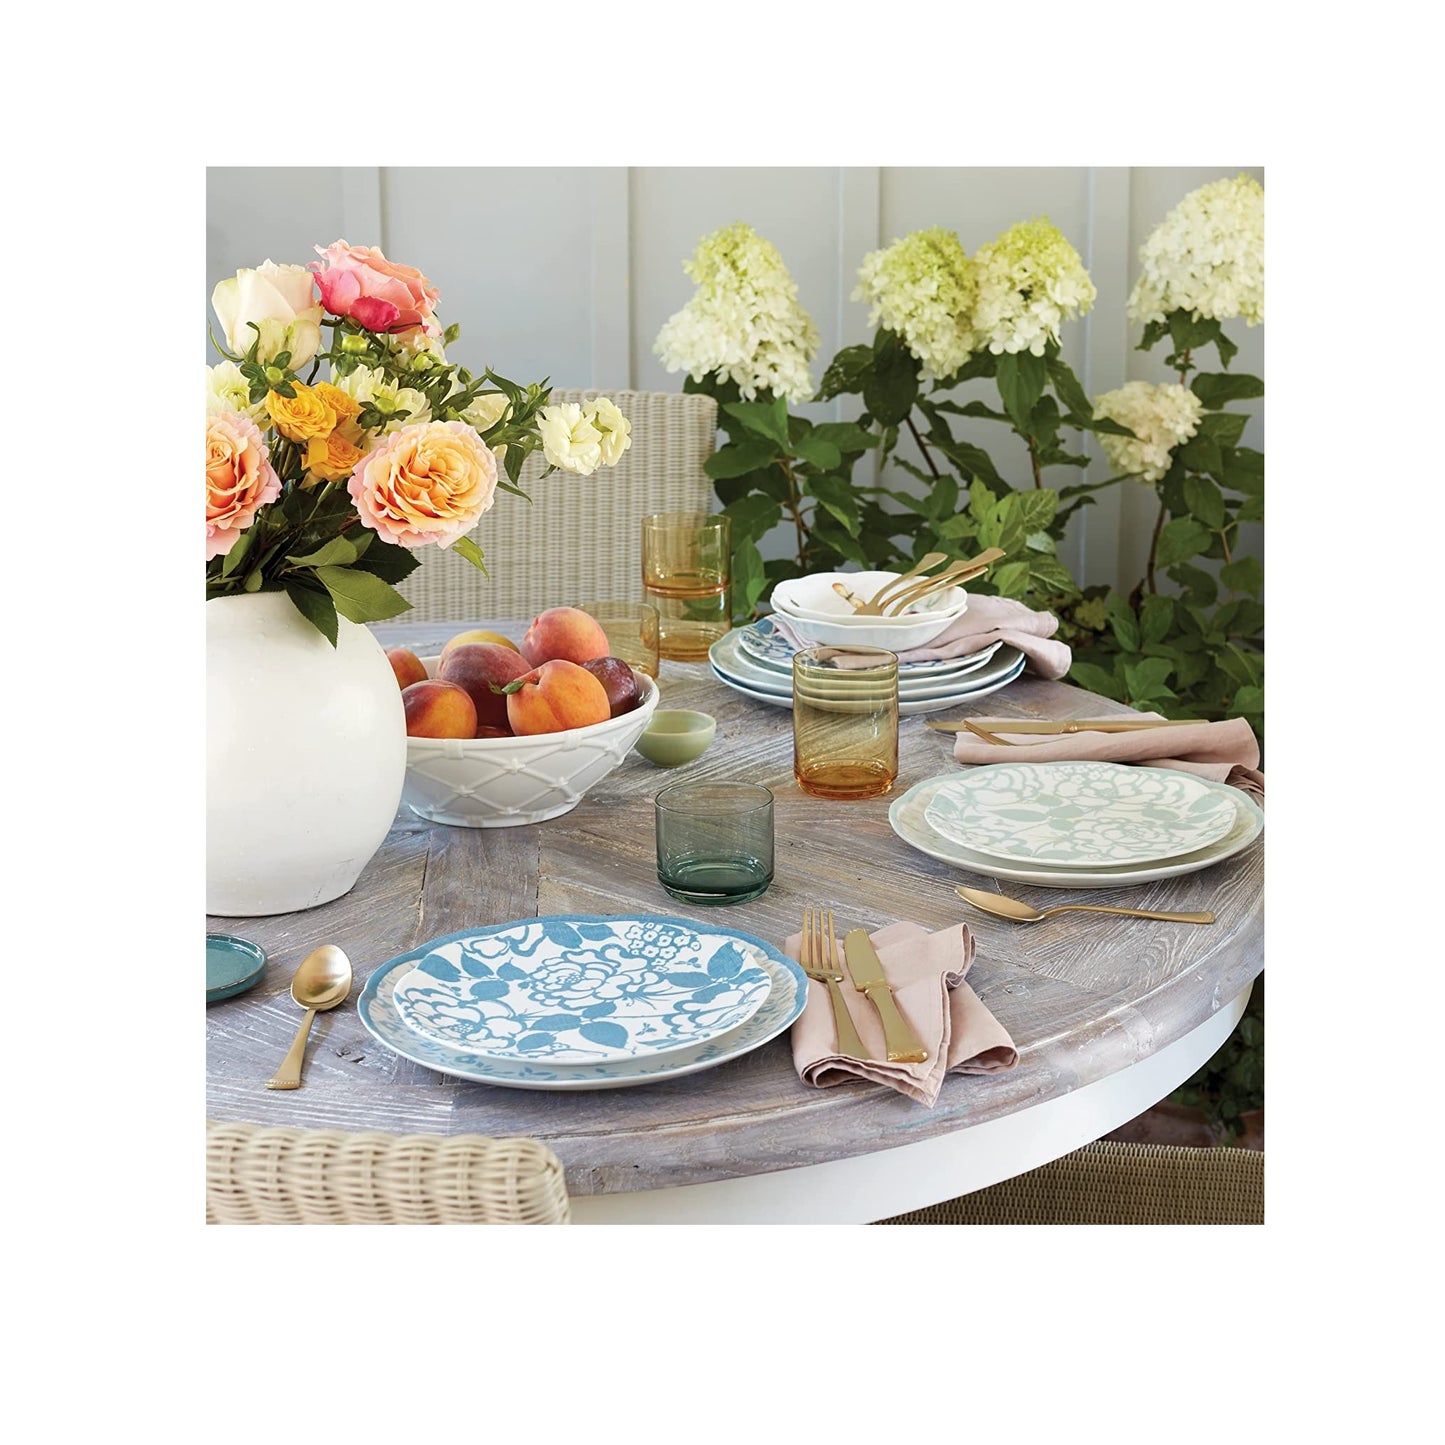 Butterfly Meadow Cottage 4-Piece Dinner Plates by Lenox